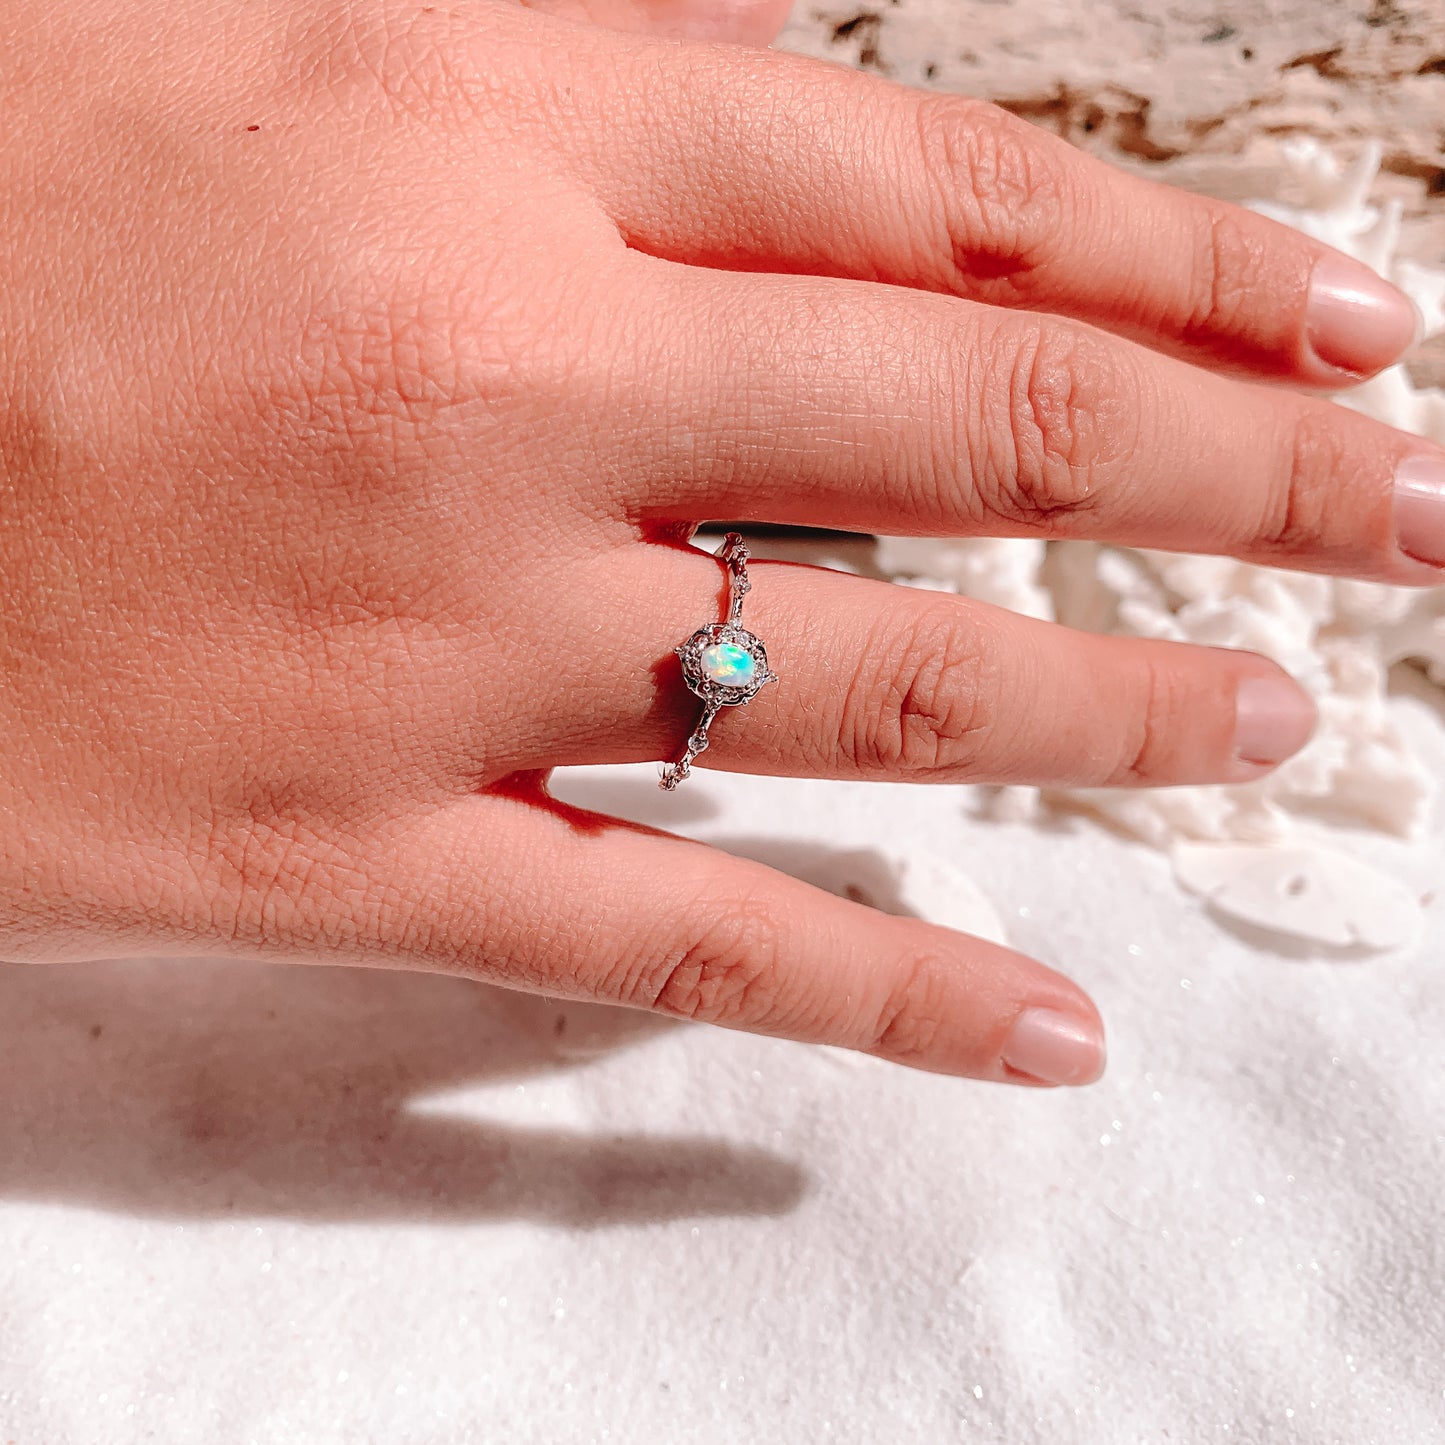 Vintage Opal Ring  | Dainty Opal Ring | White Fire Opal | Vintage Inspired Opal Ring | Tiny Opal Ring | Vintage Style | Antique Opal Ring